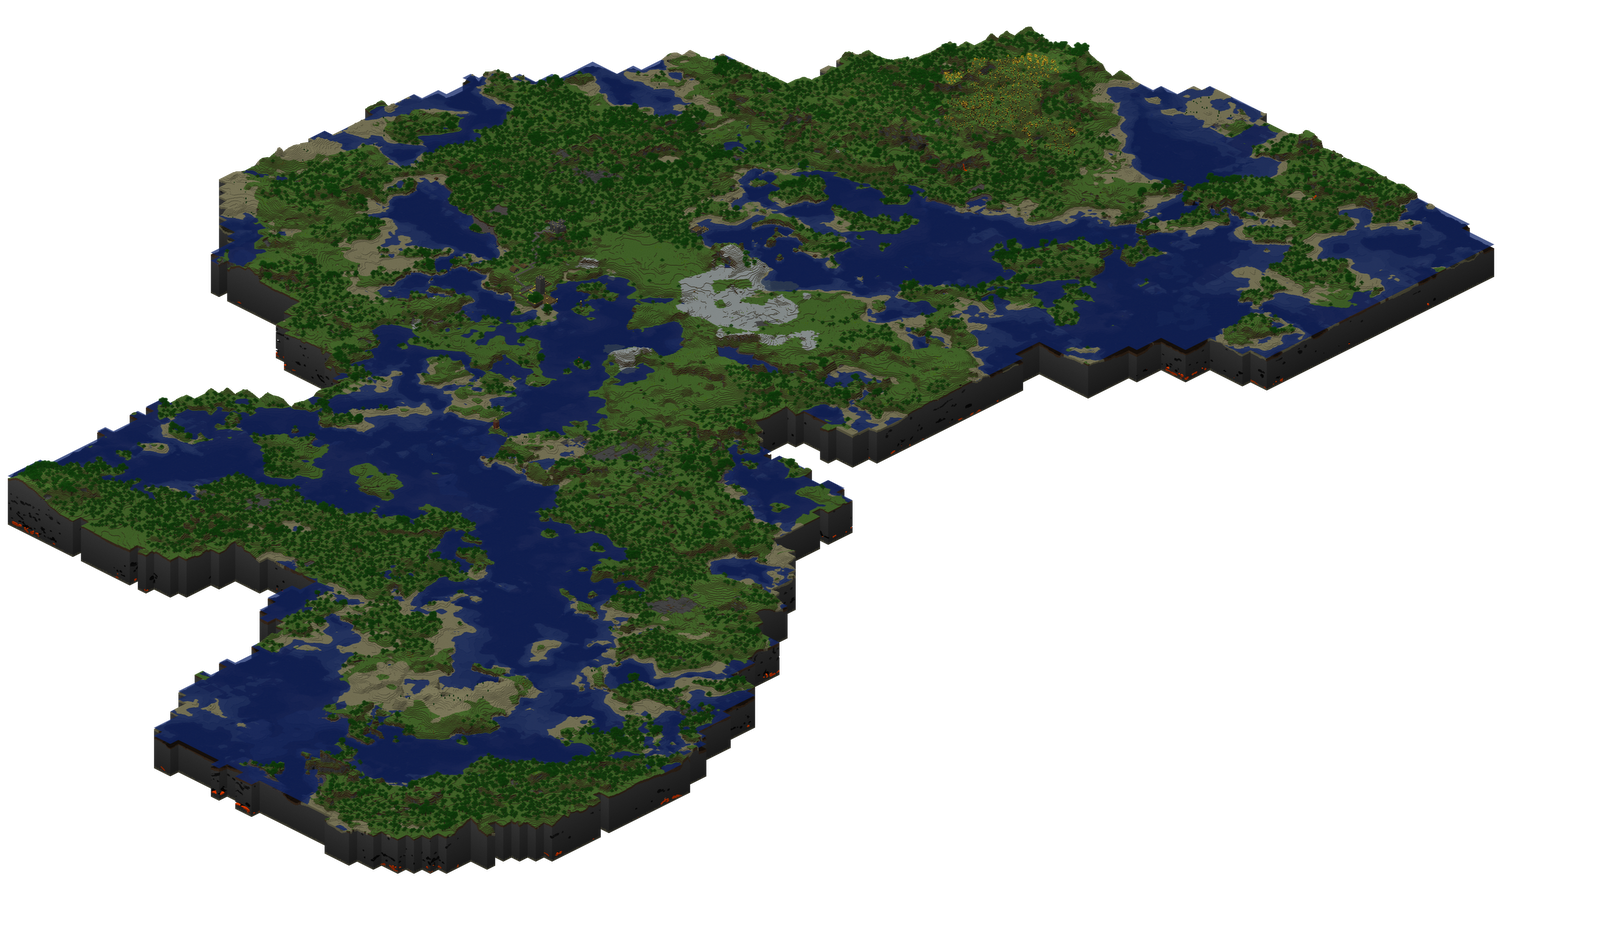 Map Of The World Minecraft Here is the most recent map of my Minecraft world. Click the image for an enlarged view.